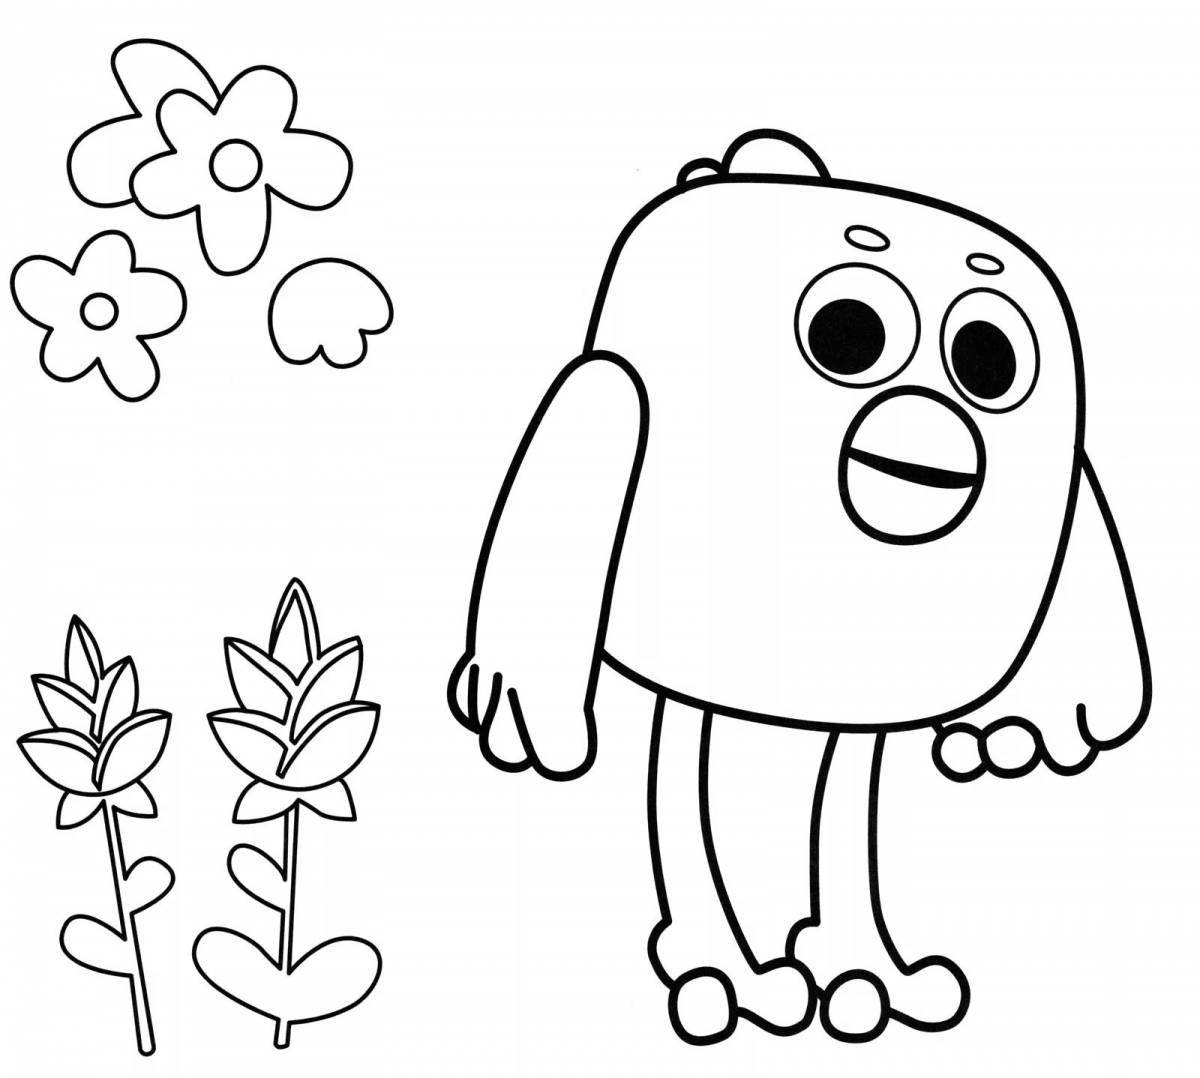 Cute and fluffy cute chick coloring book